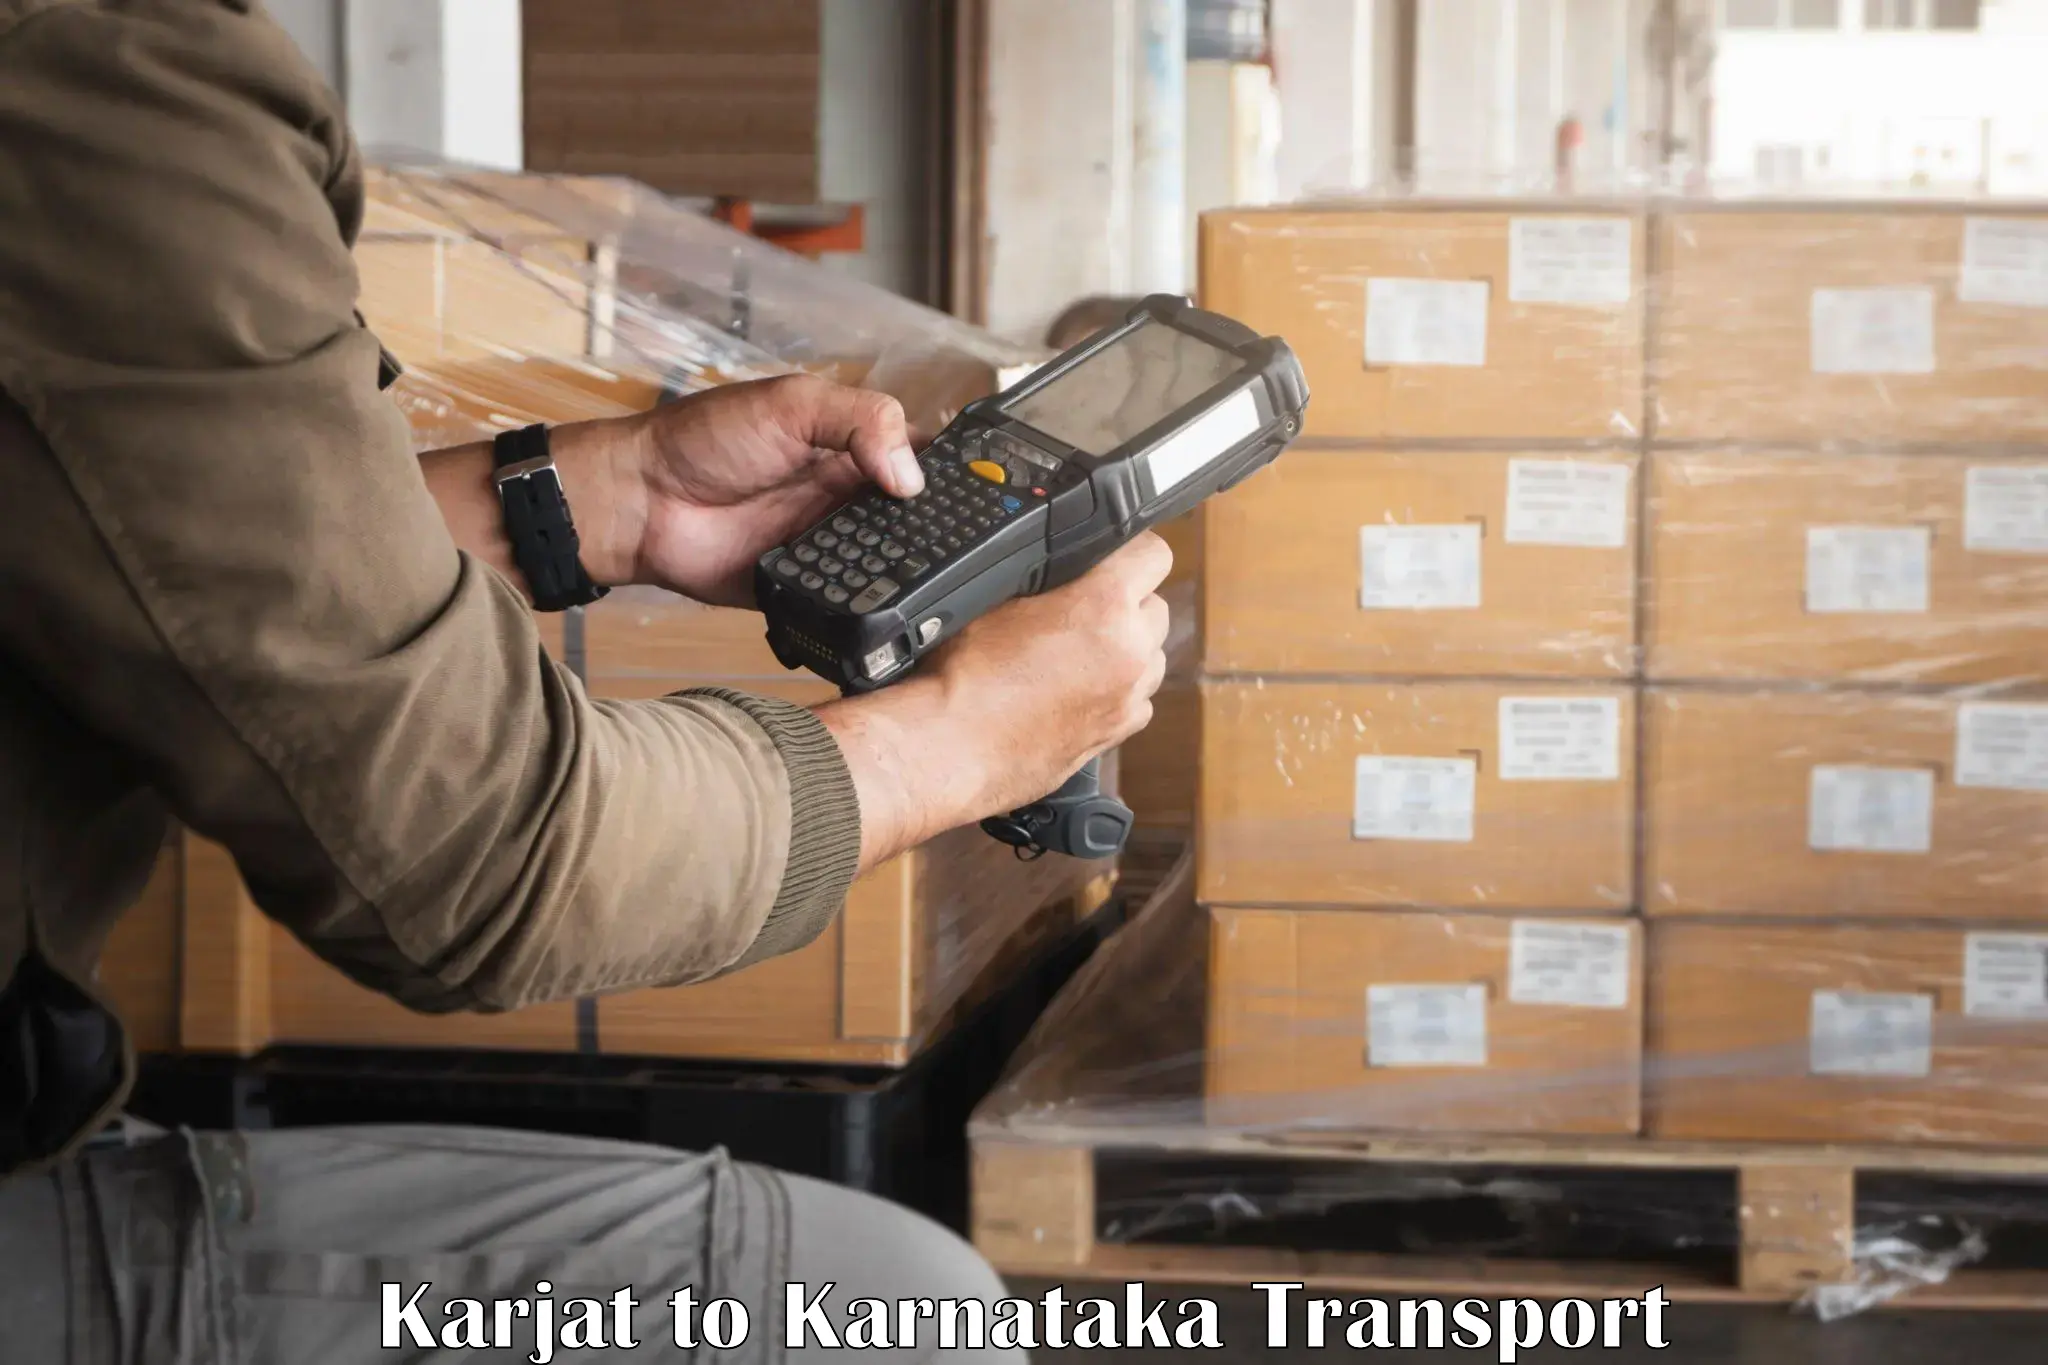 Air freight transport services in Karjat to Kollegal